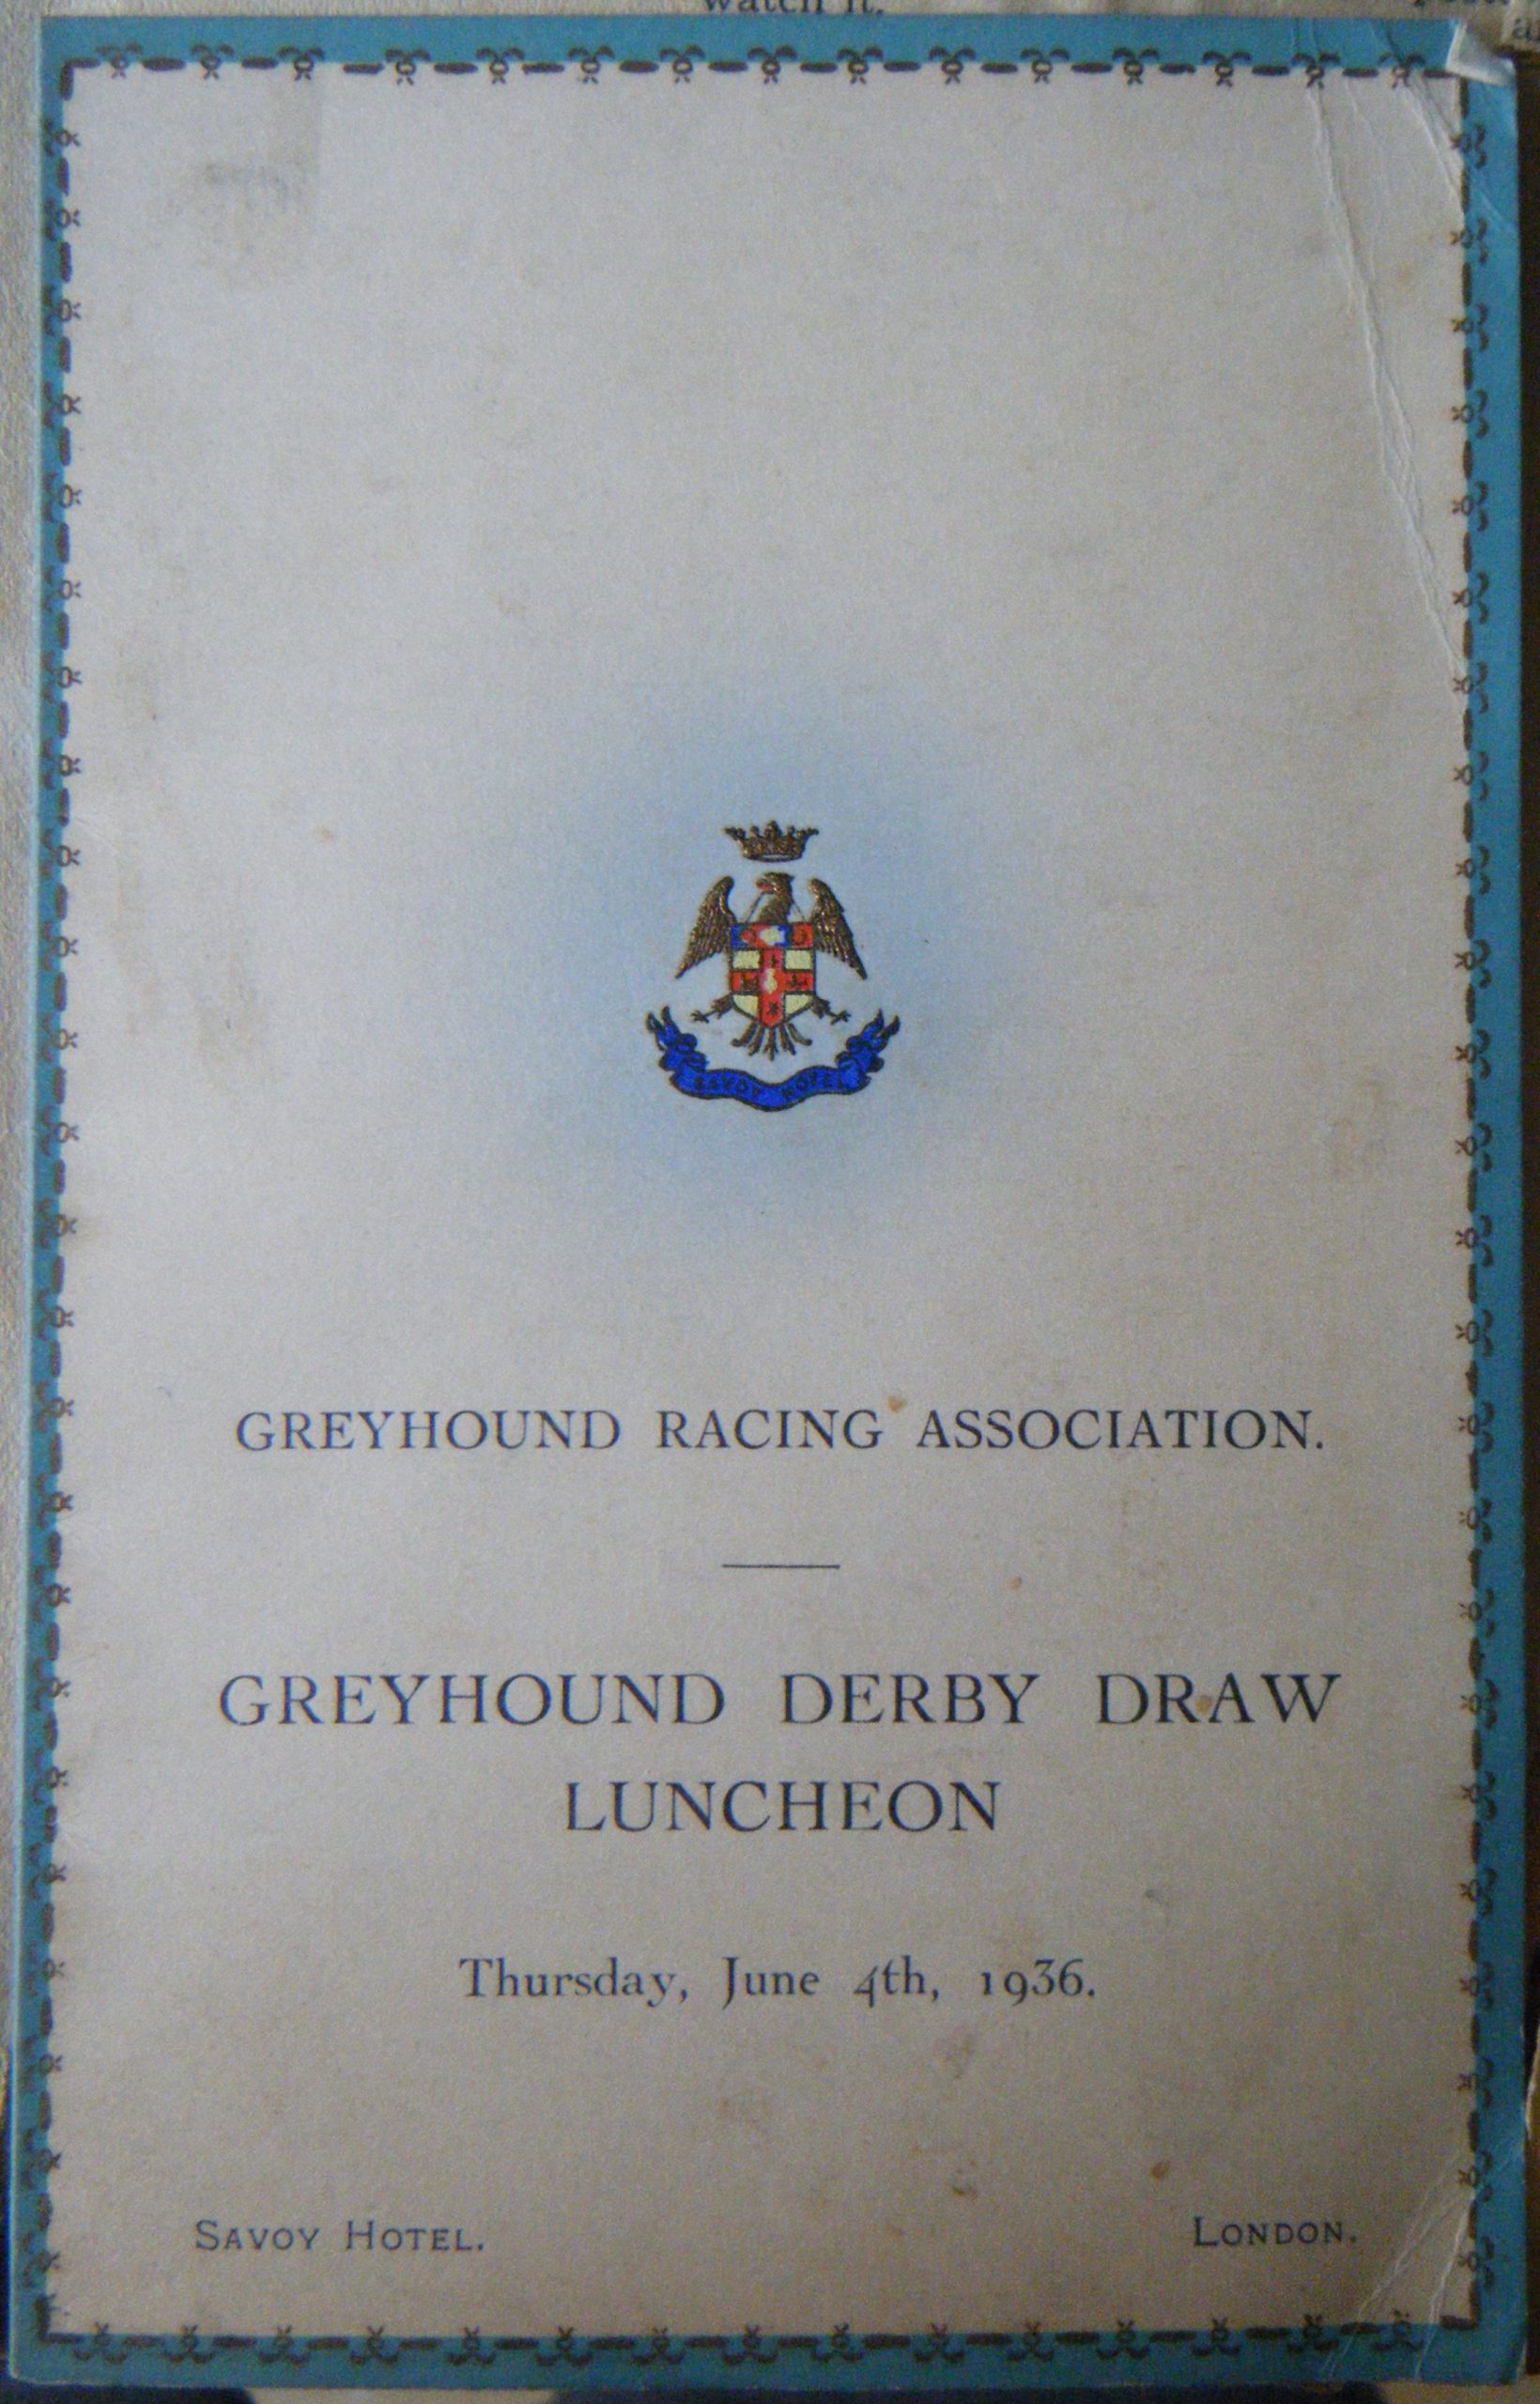 The History of Greyhound Racing in the UK 1